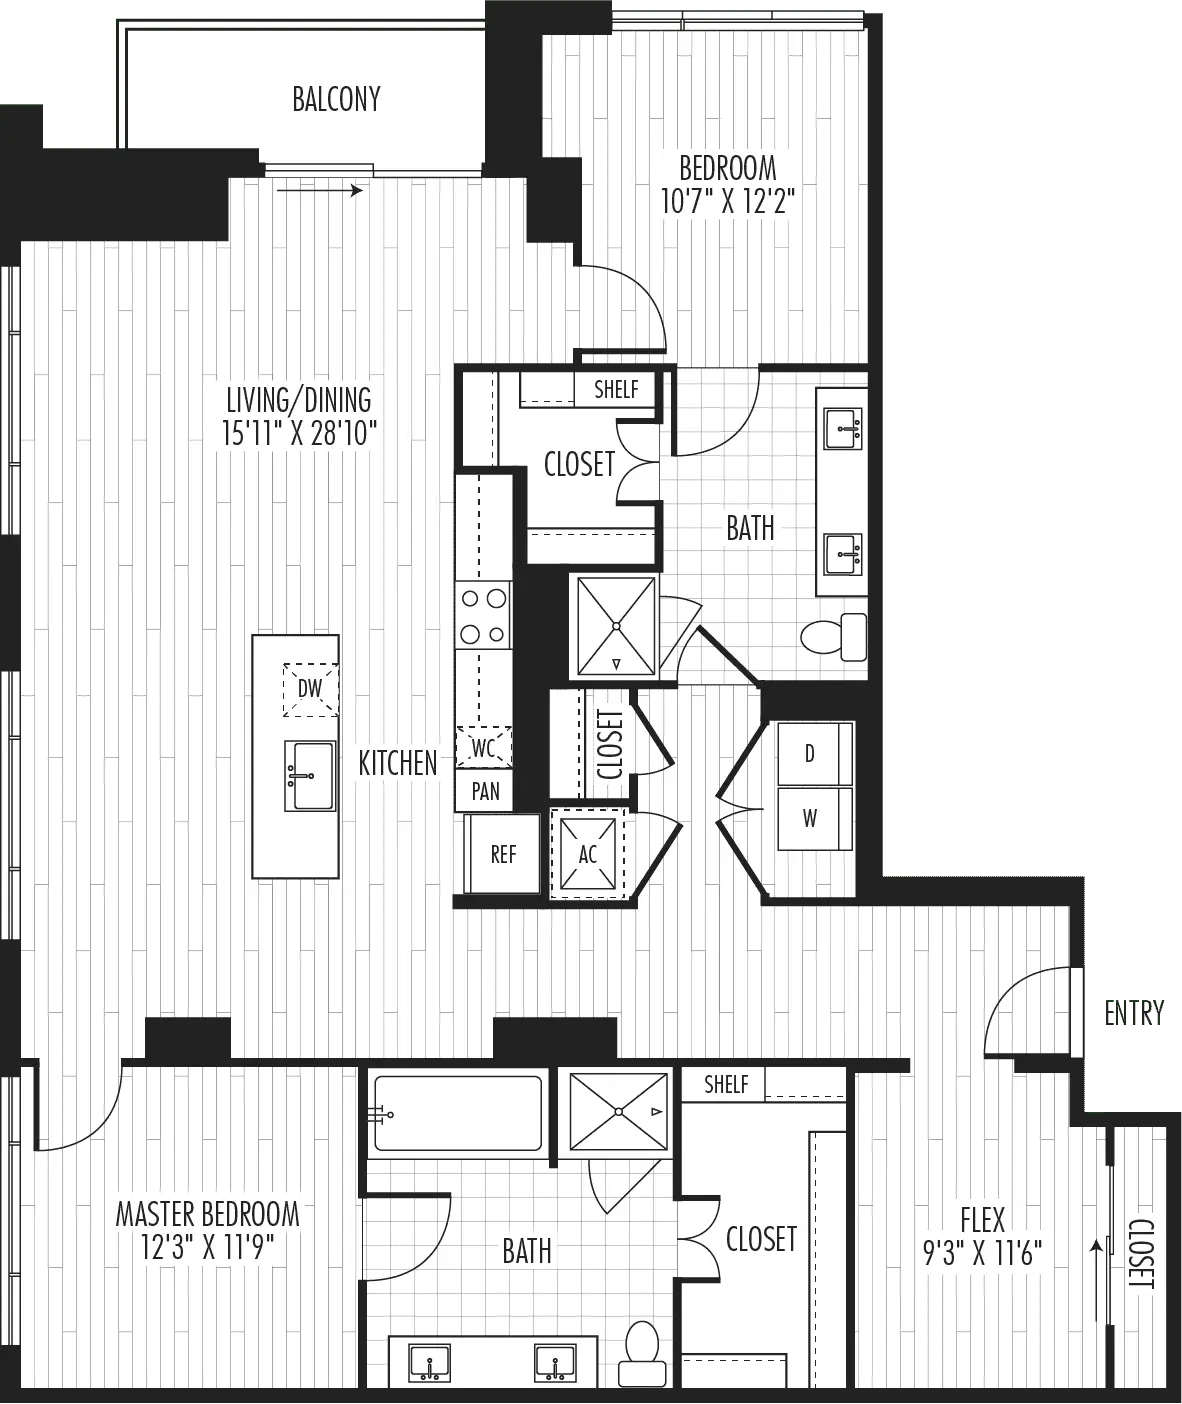 The Residences at La Colombe d’Or Houston Apartments FloorPlan 11